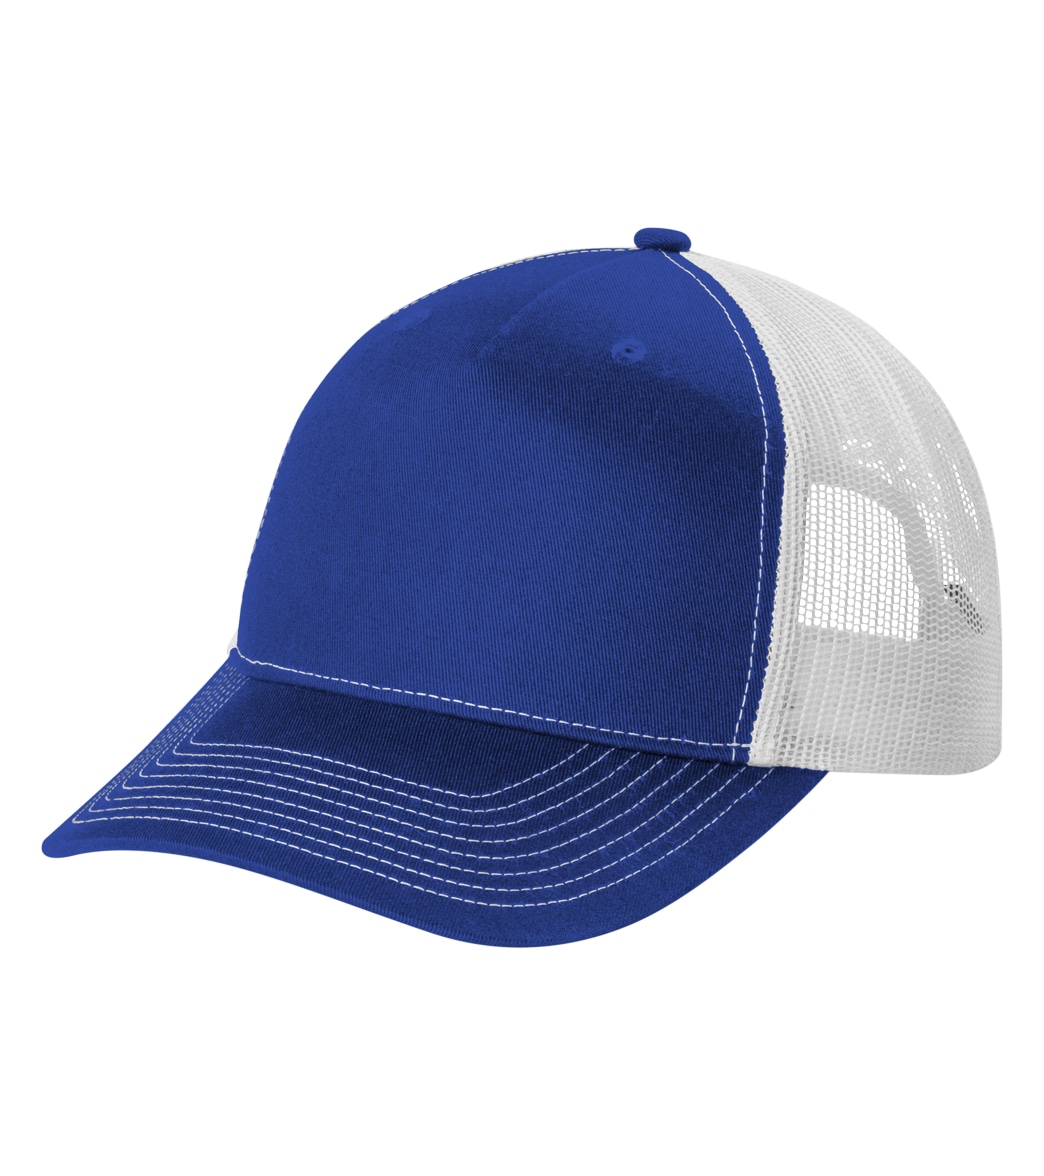 Snapback Trucker Hat - Patriot Blue/White One Size Cotton/Polyester - Swimoutlet.com